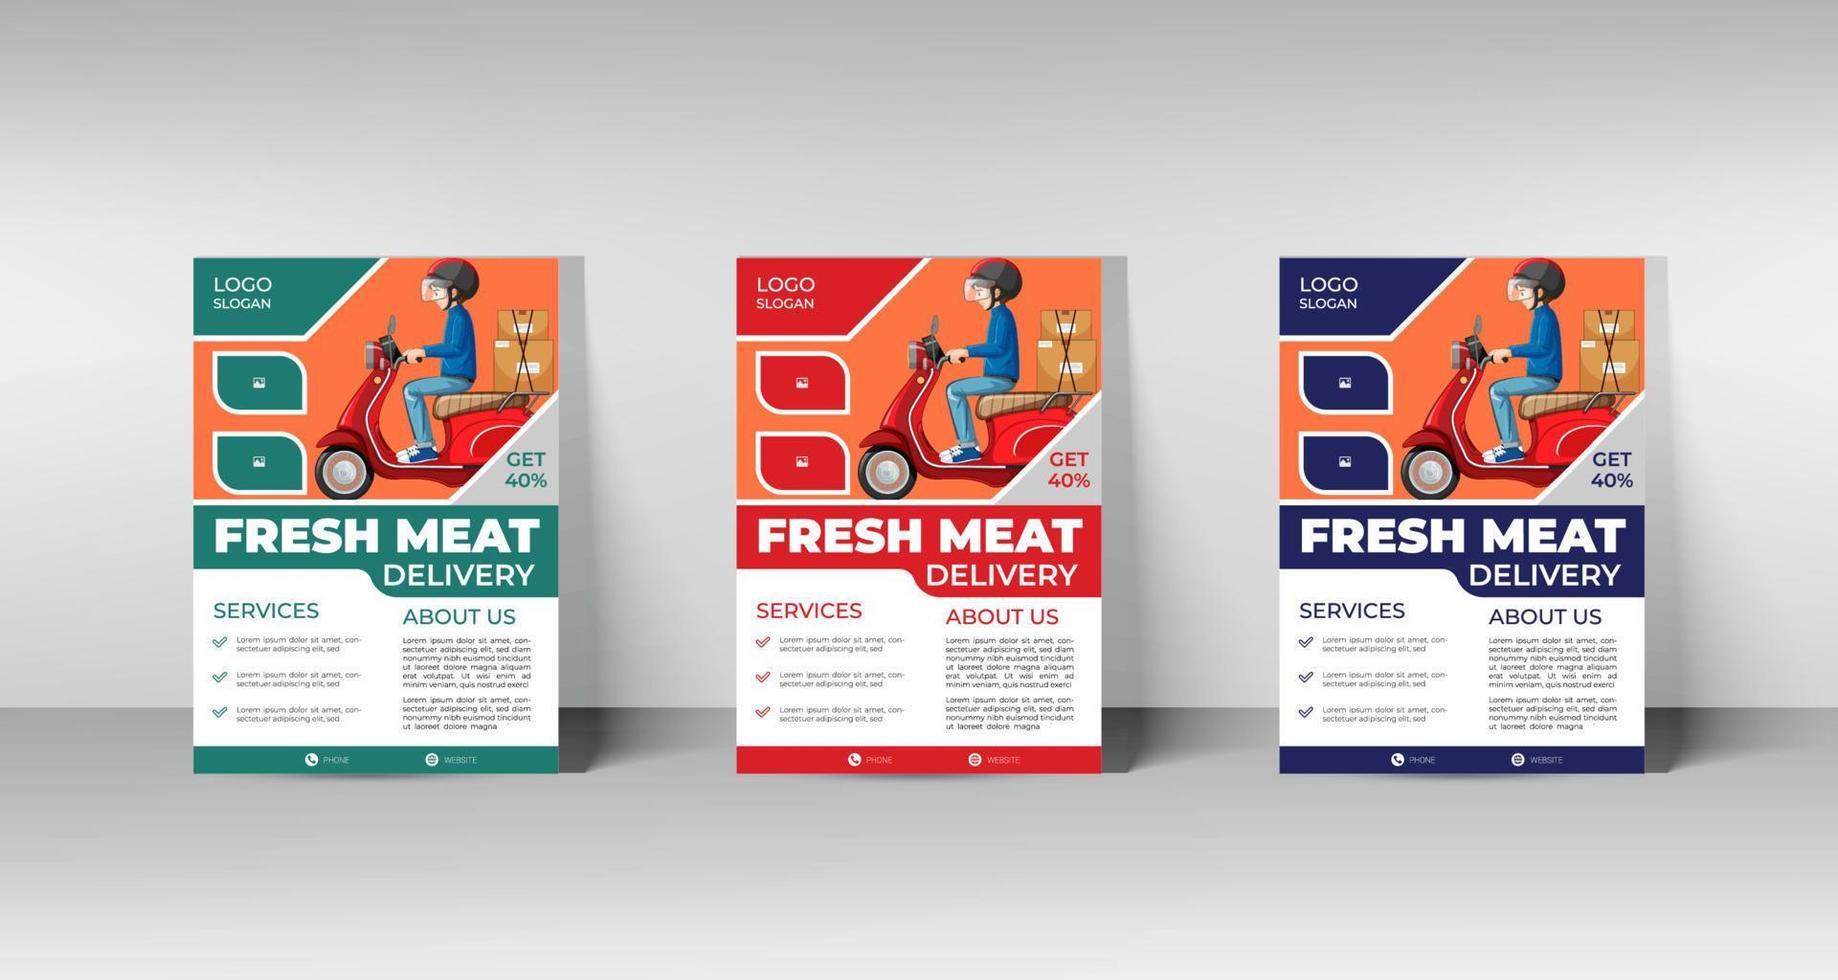 Fresh meat delivery services flyer design template. A4 size and fully editable file vector